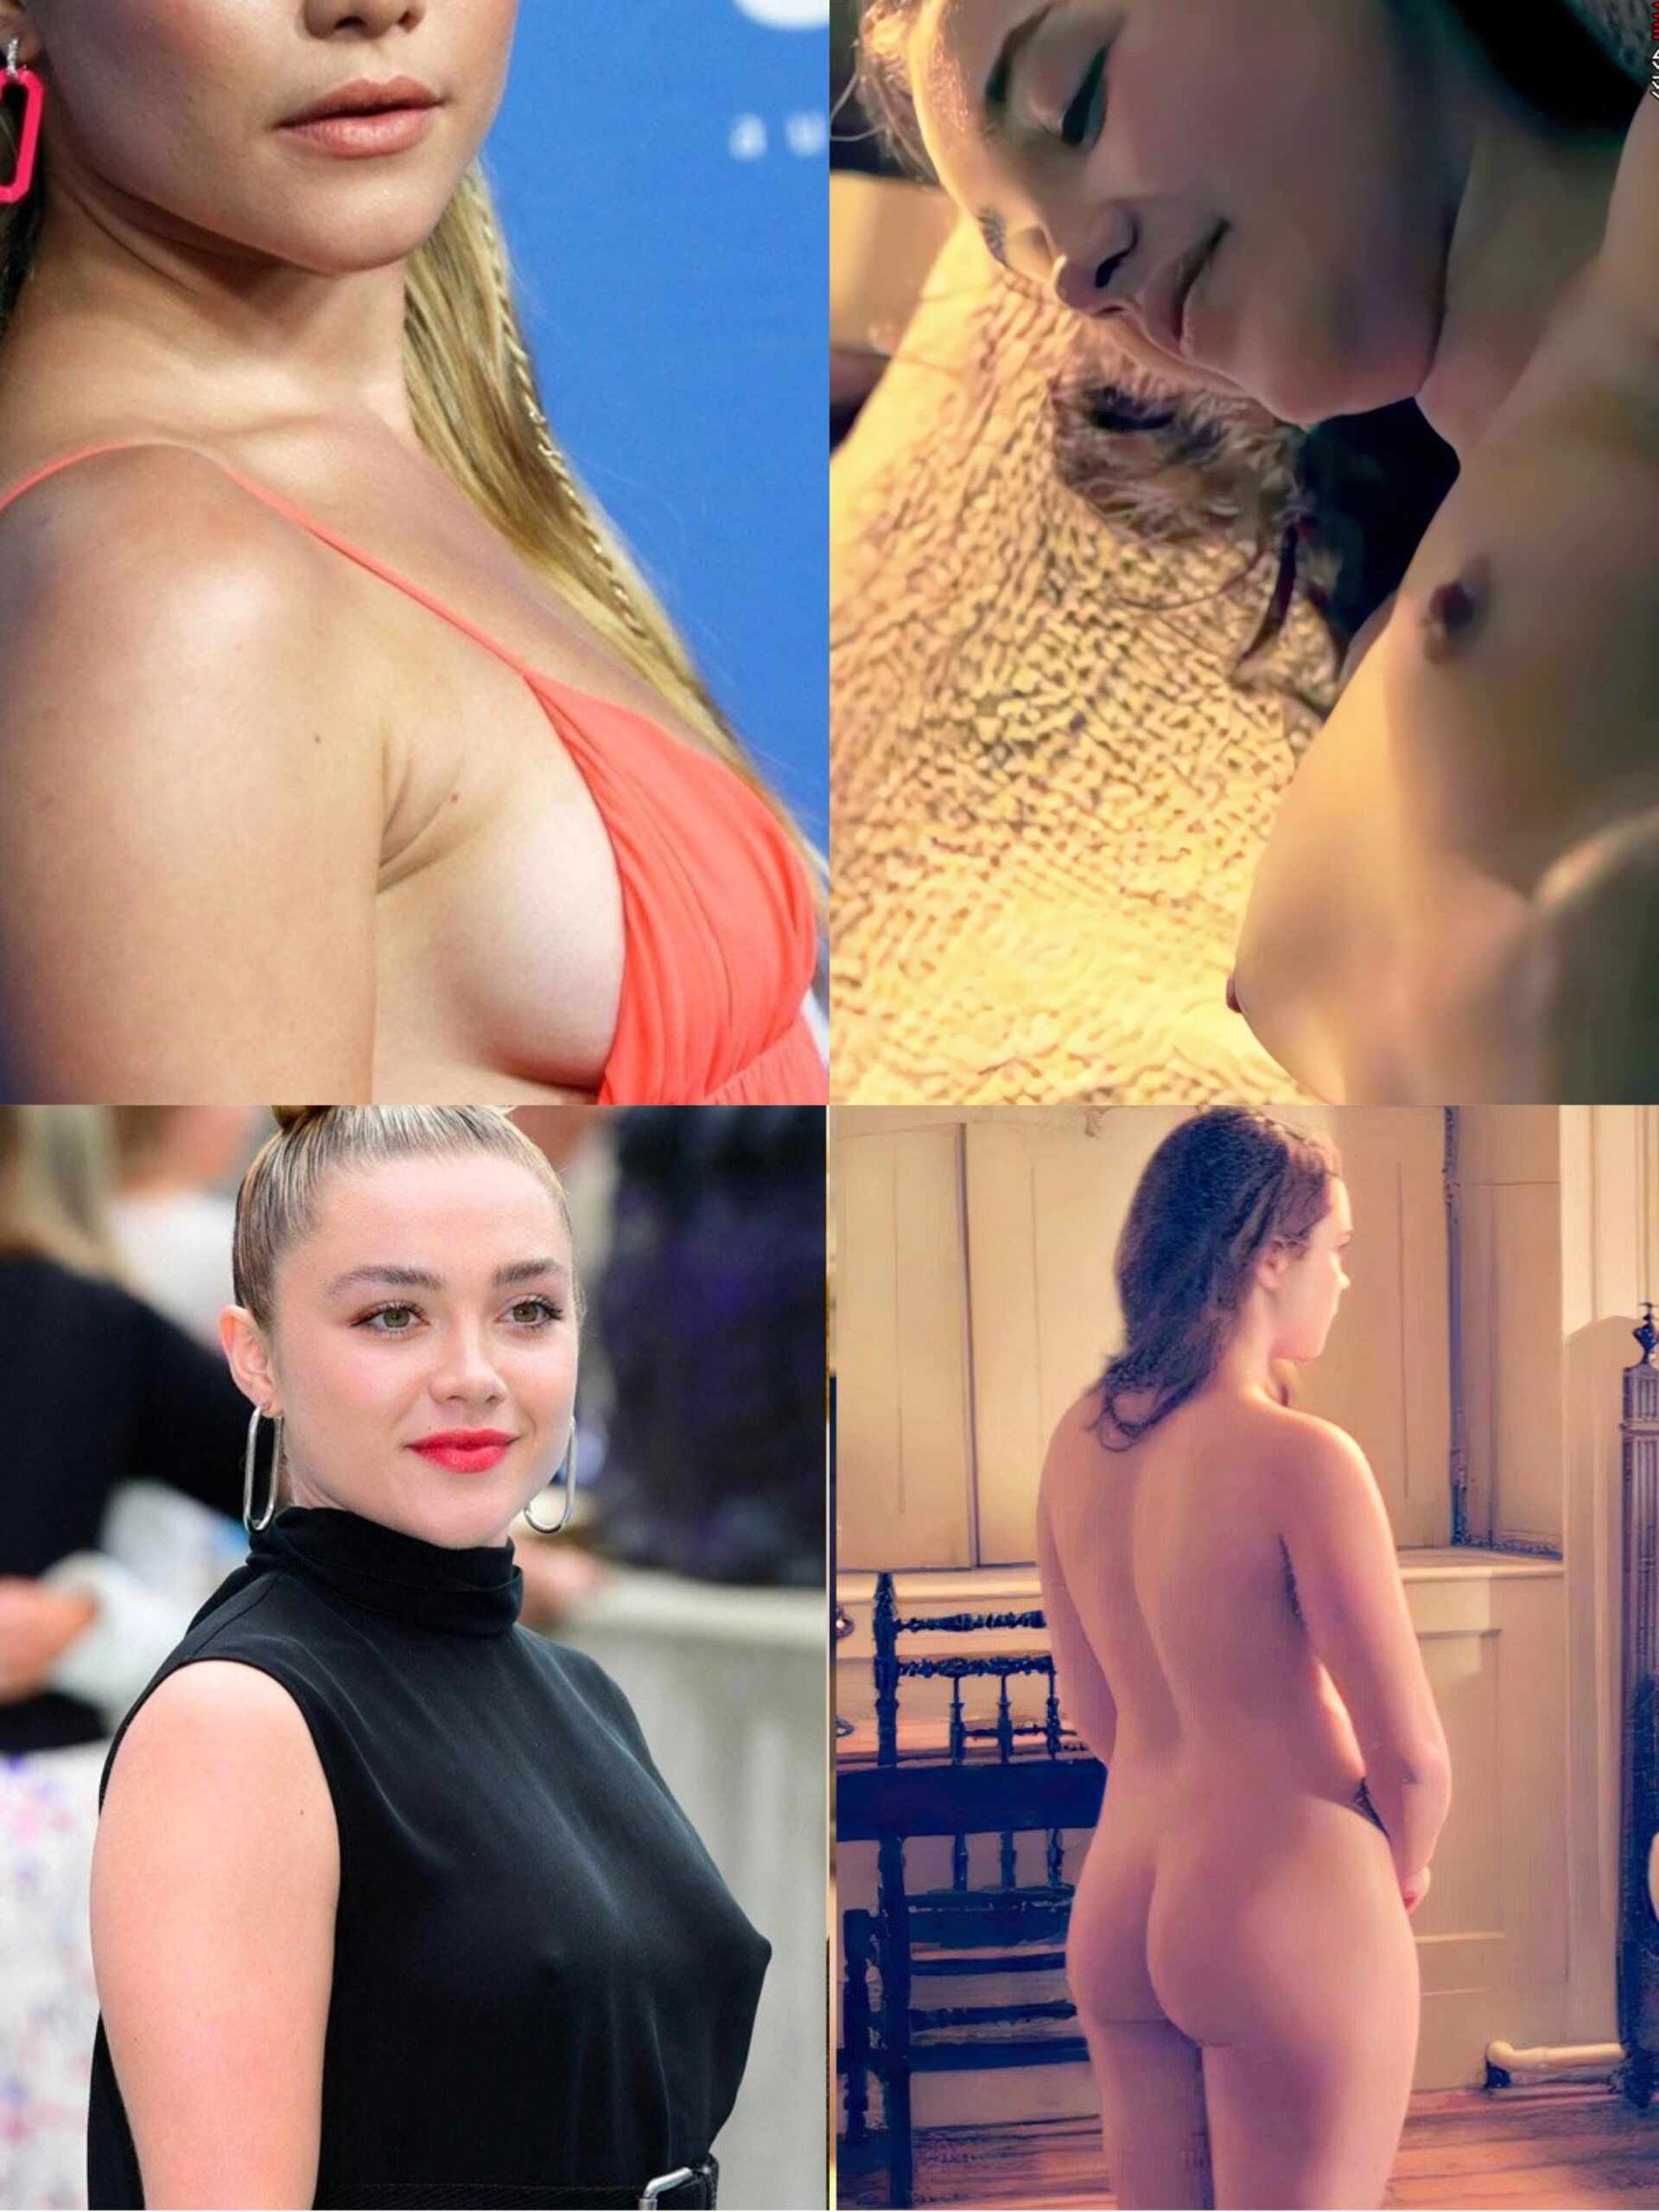 Check Out Our Best Photos, Leaked Naked Videos And Scandals Updated Daily. 